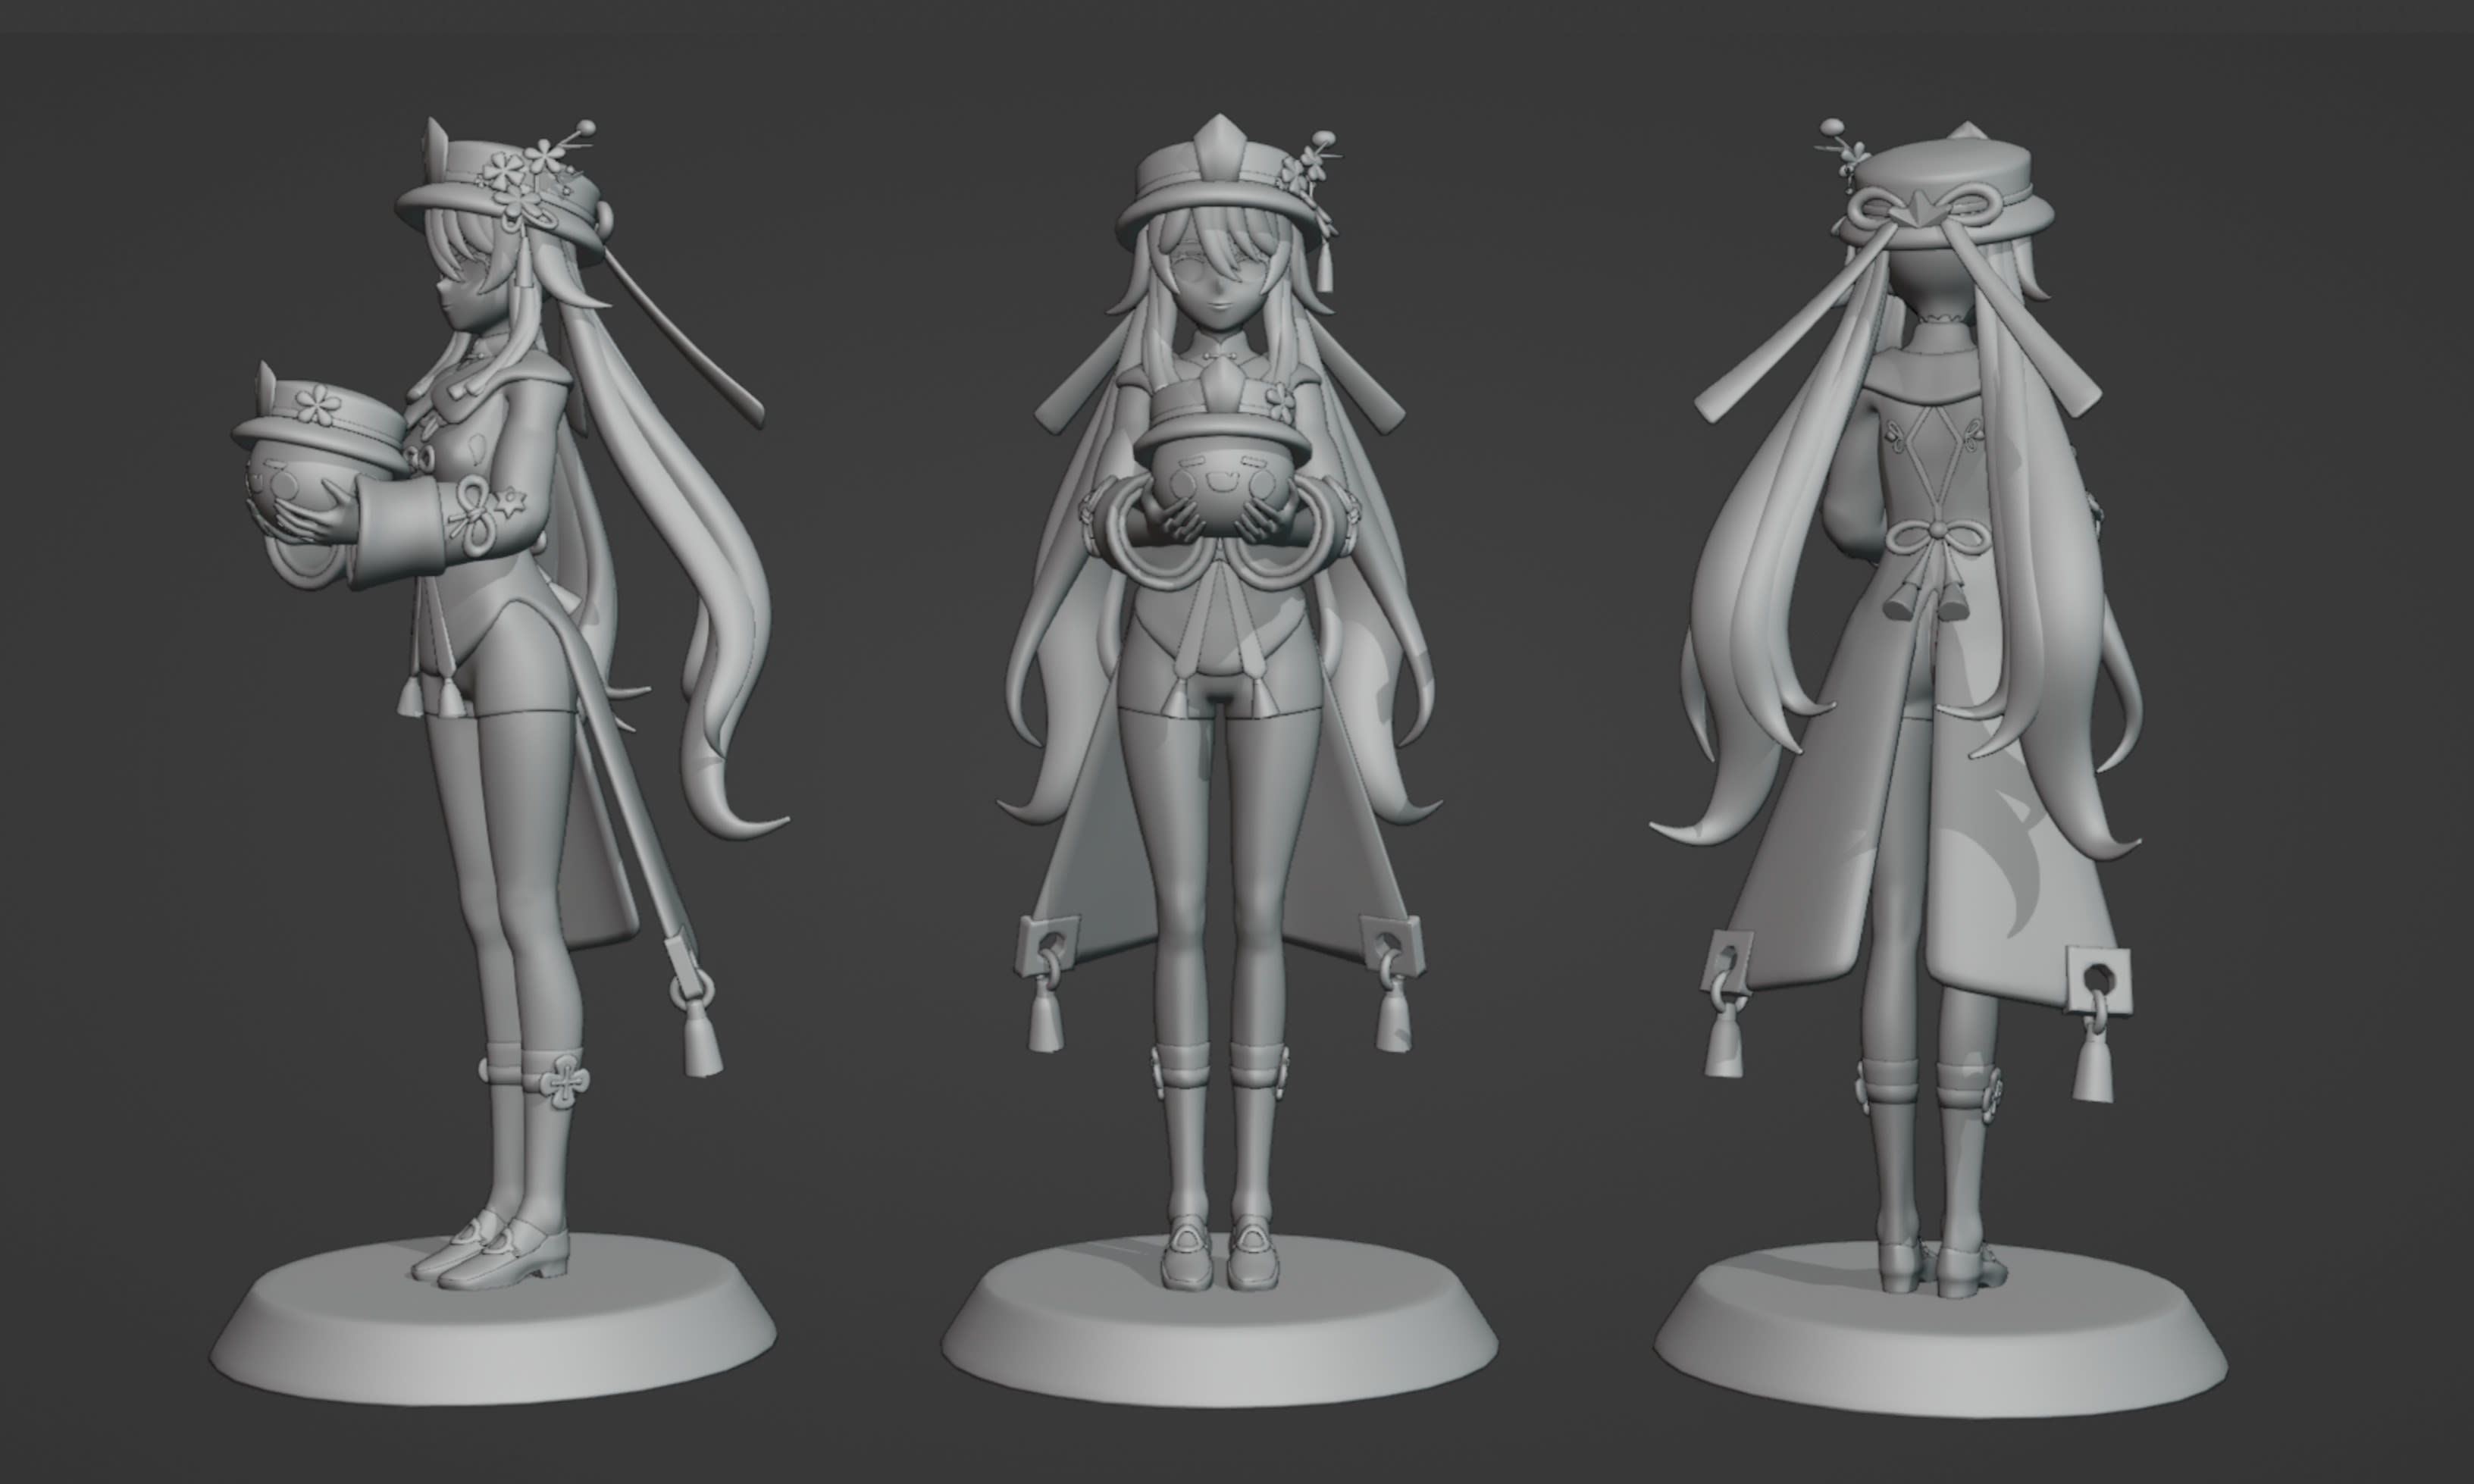 3D Printing Your Own Custom Anime Figures | Open World Learning